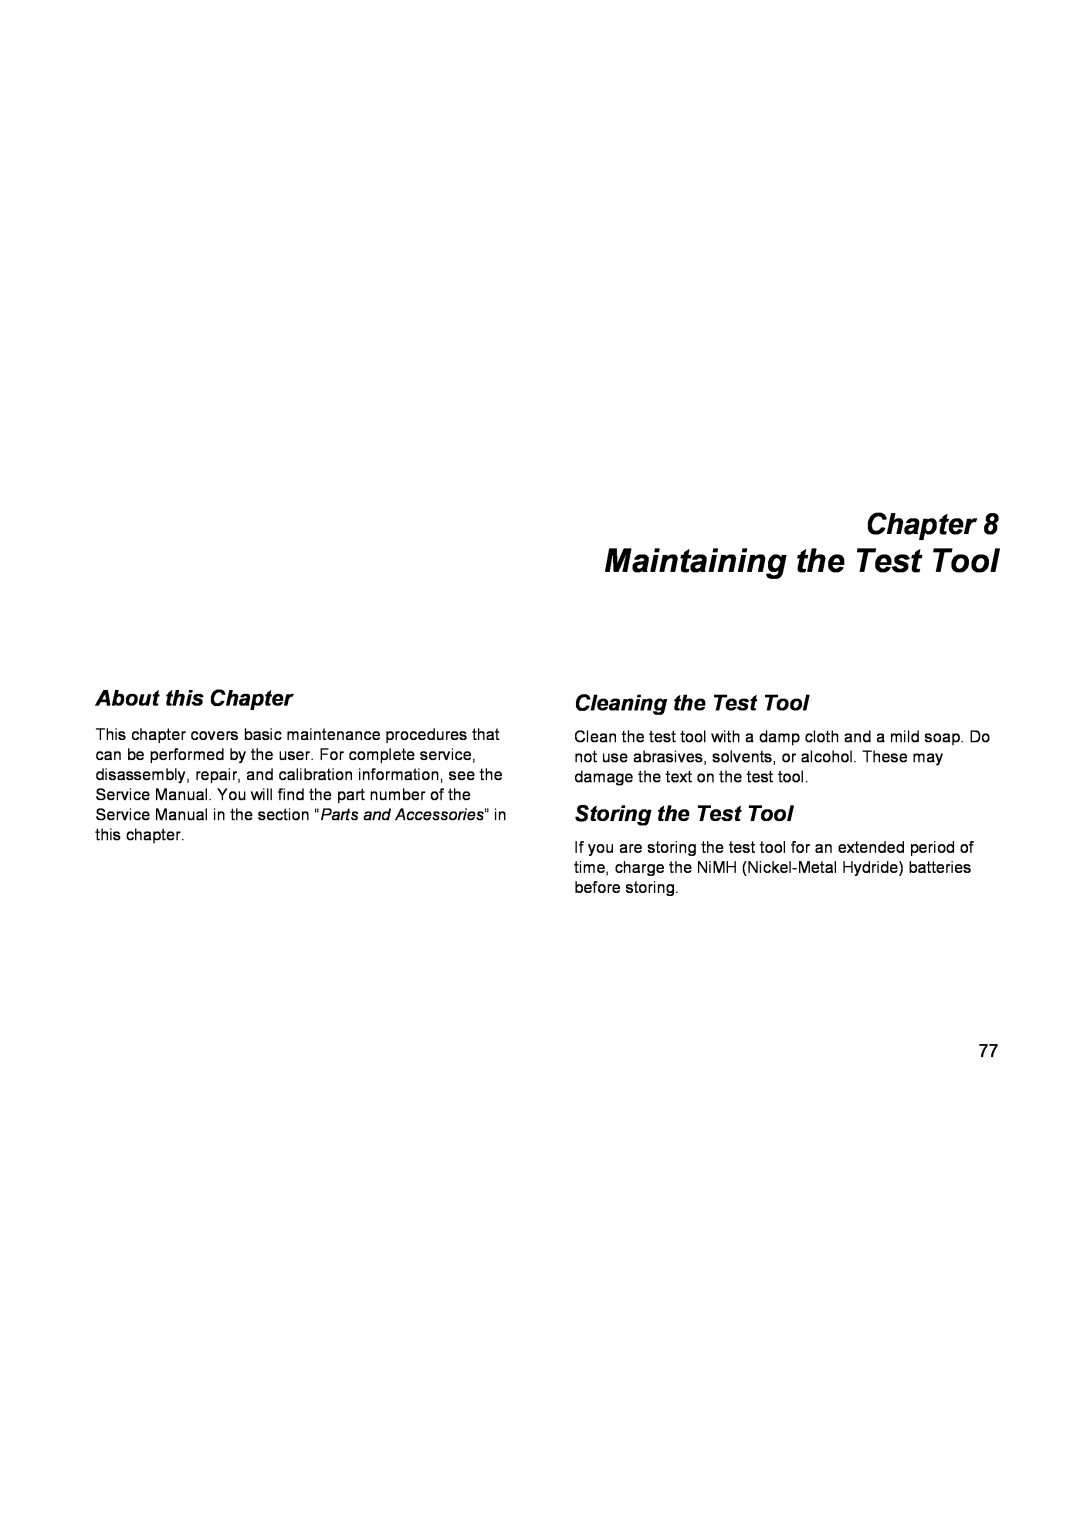 Fluke 196C user manual Maintaining the Test Tool, Cleaning the Test Tool, Storing the Test Tool, About this Chapter 